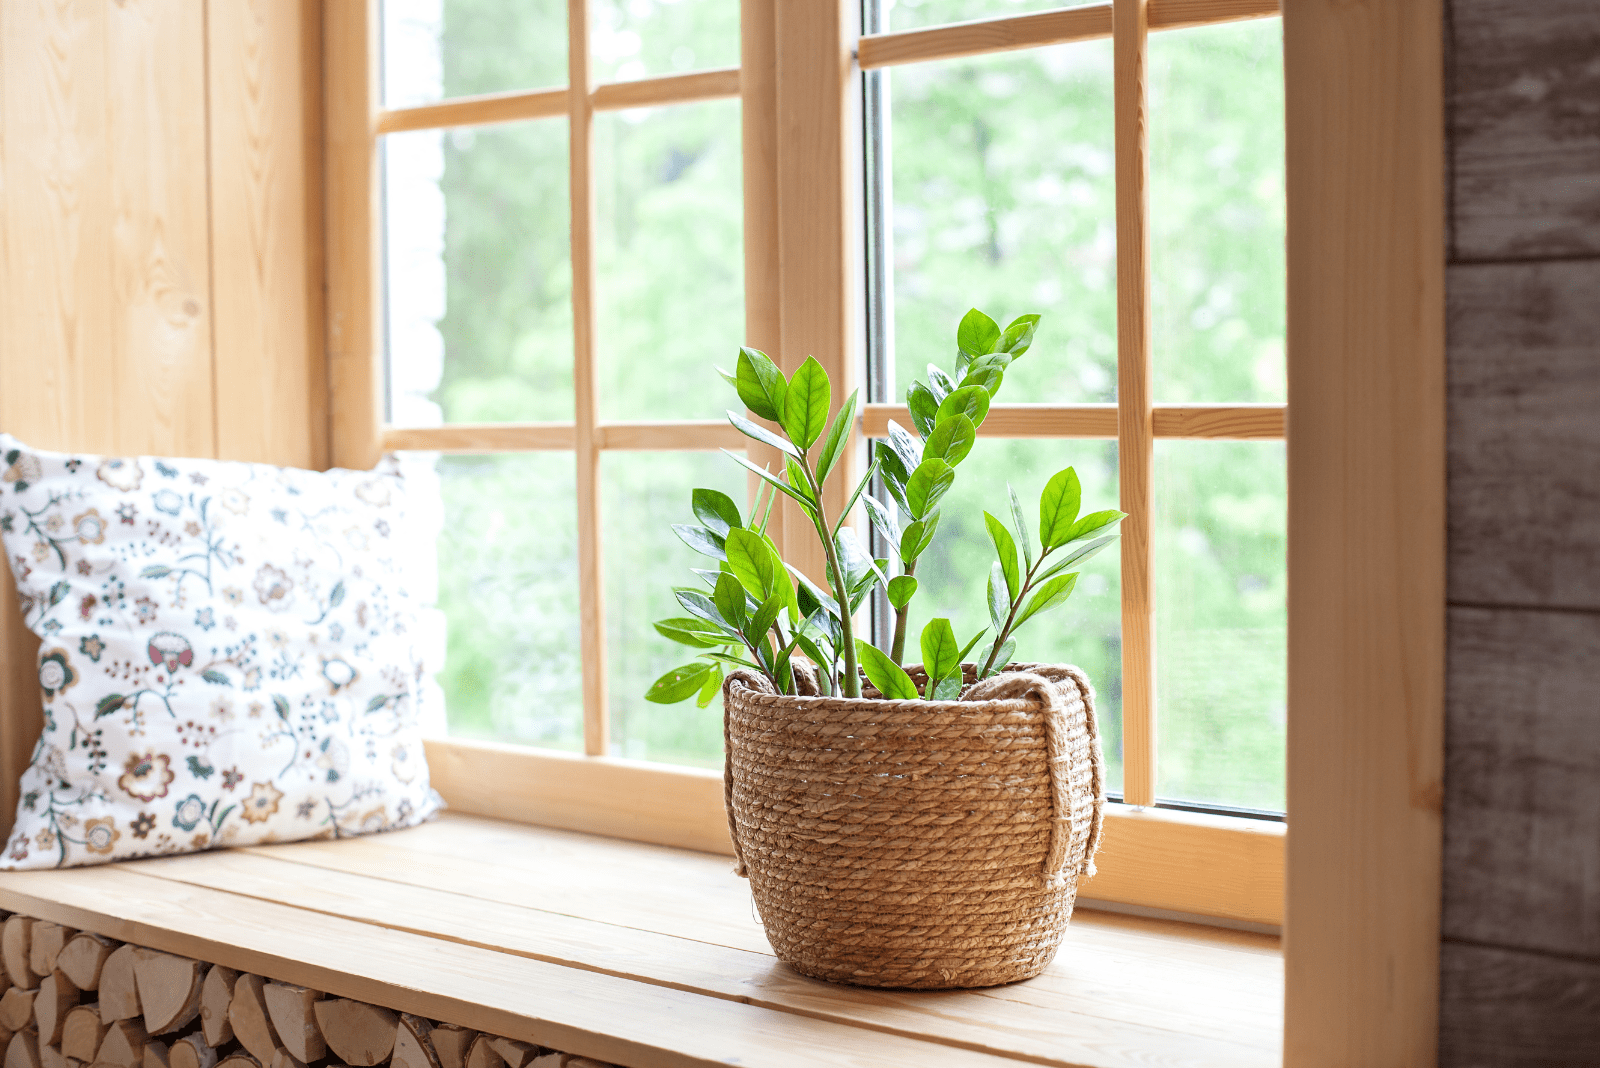 ZZ Plant in a pot by the window